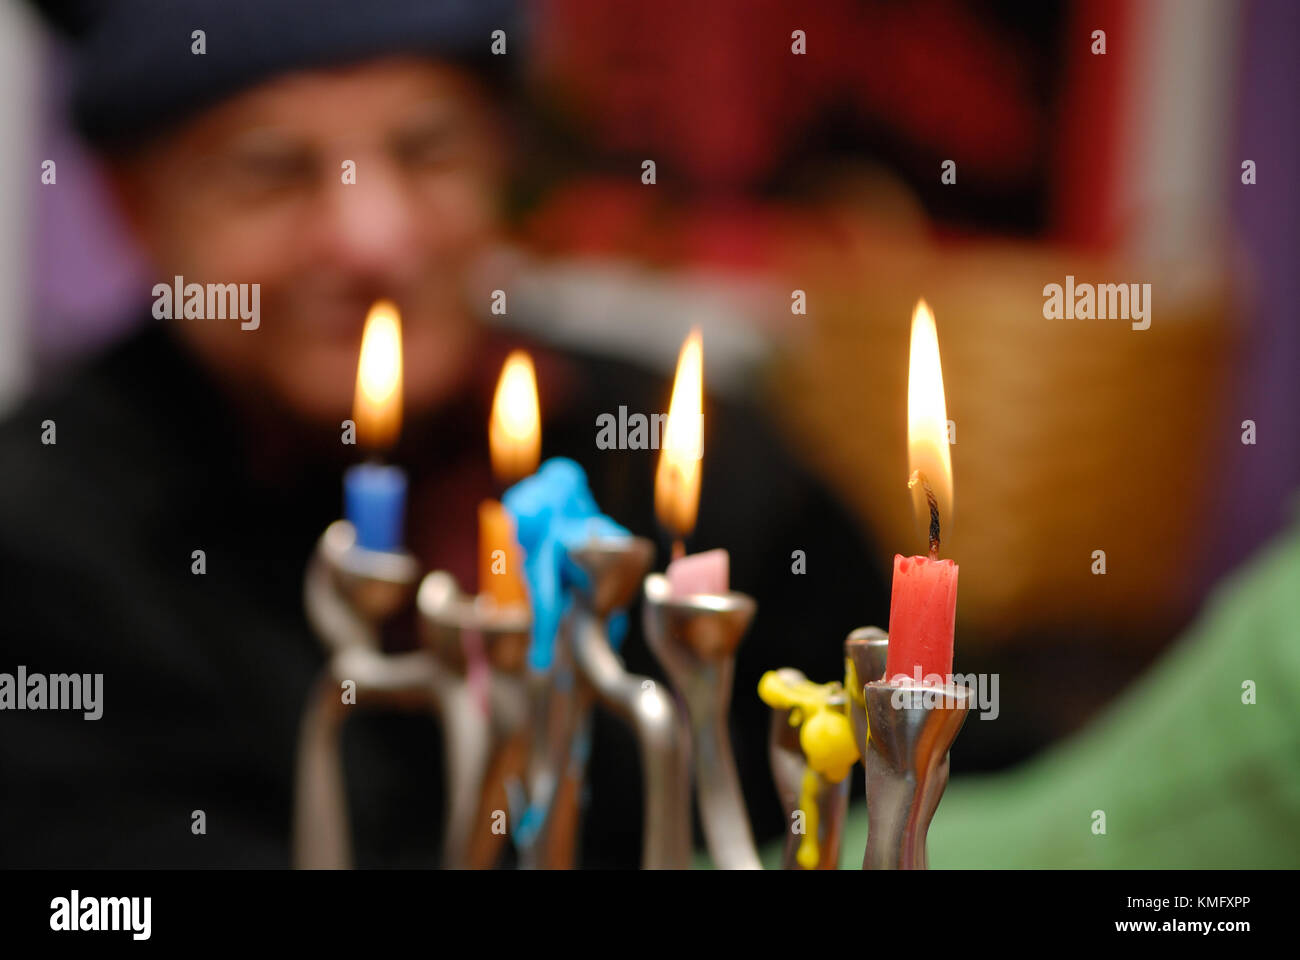 Hanukkah menorah background. Closeup of candles burning during the celebration of Hanukkah, a Jewish holiday, old man watch in the background. Stock Photo